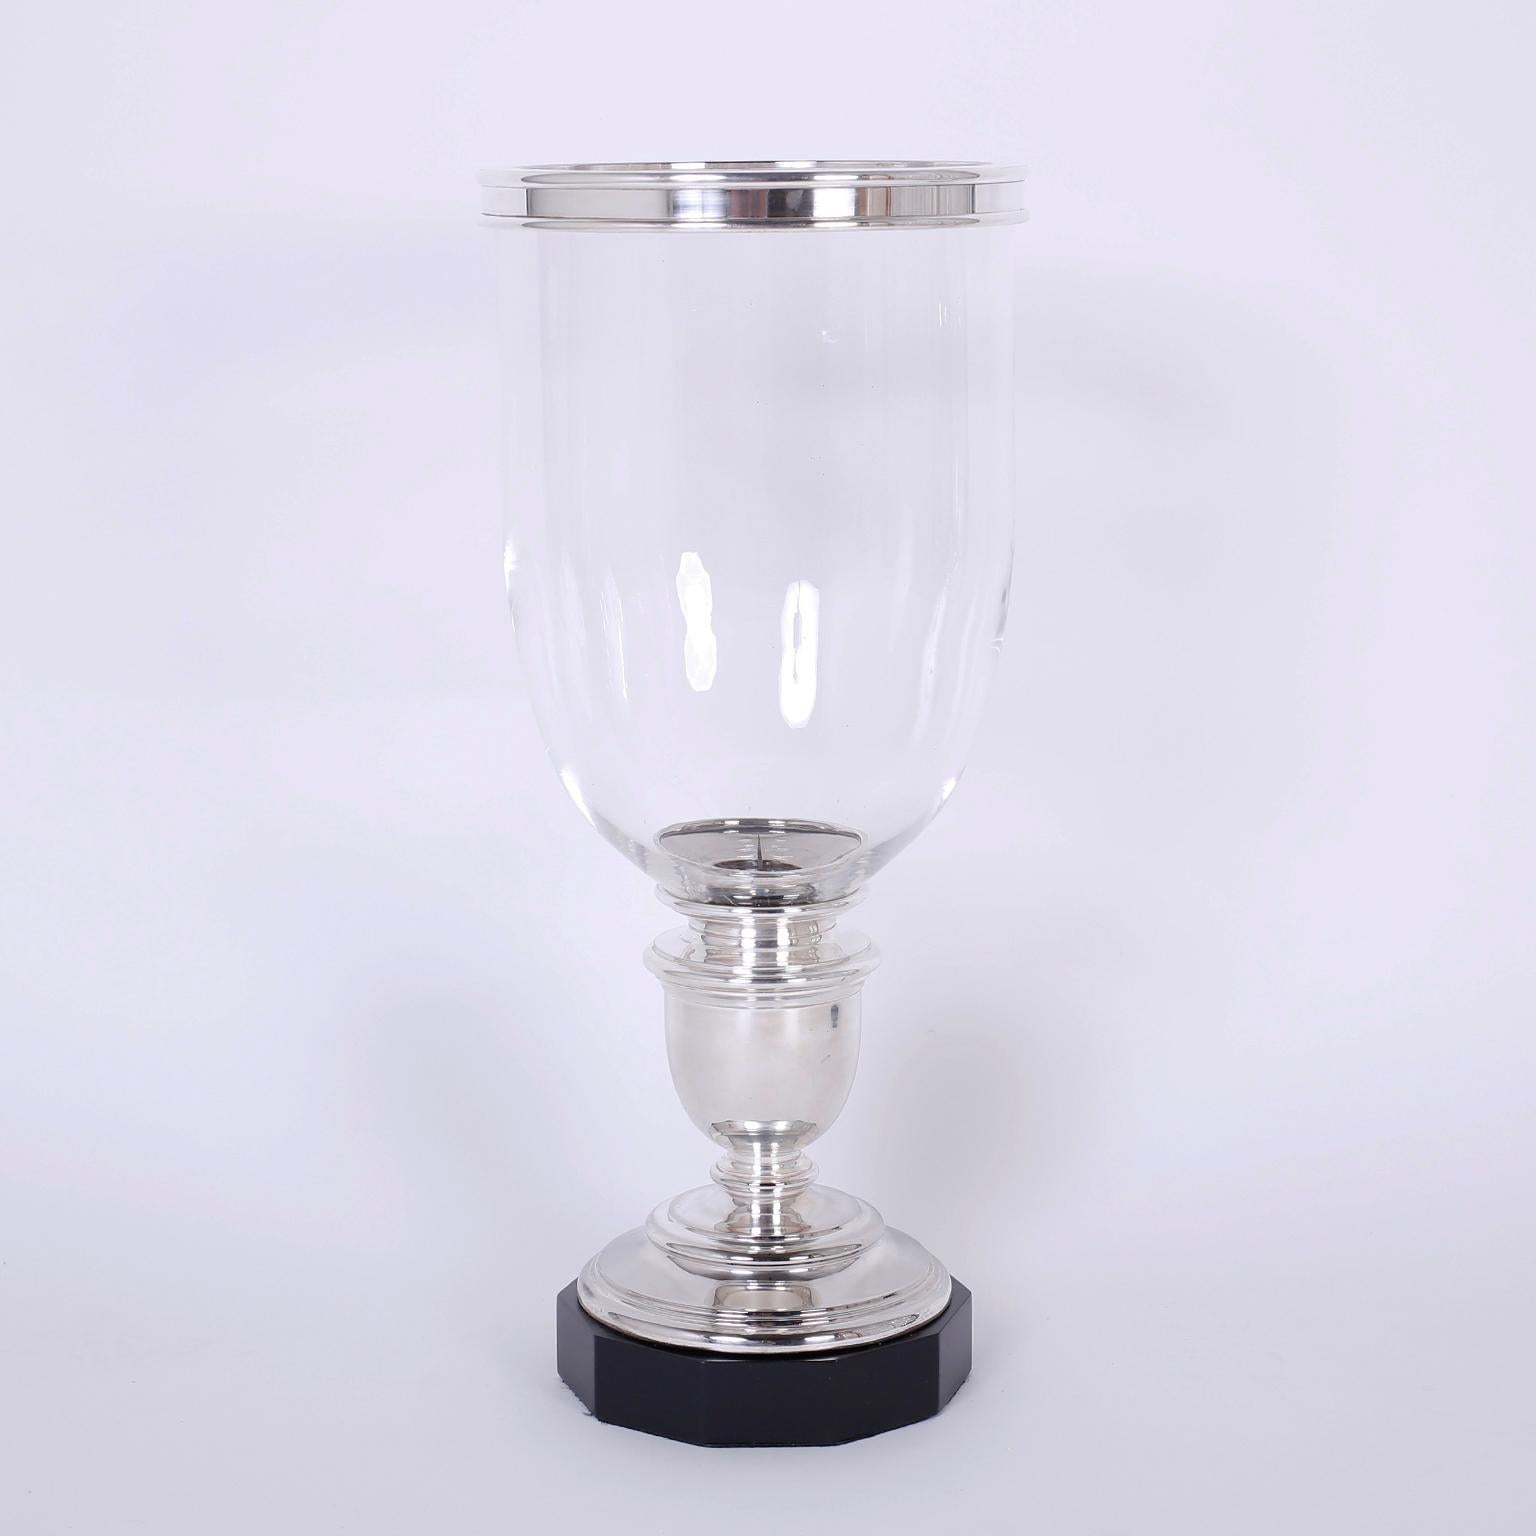 Pair of hurricane candleholders with a bold, large-scale and removable silver plated rim on handblown glass shades. The silver plated bases have a classical form and sit on ebonized, octagon wood stands. Signed Ralph Lauren on a metal plaque.